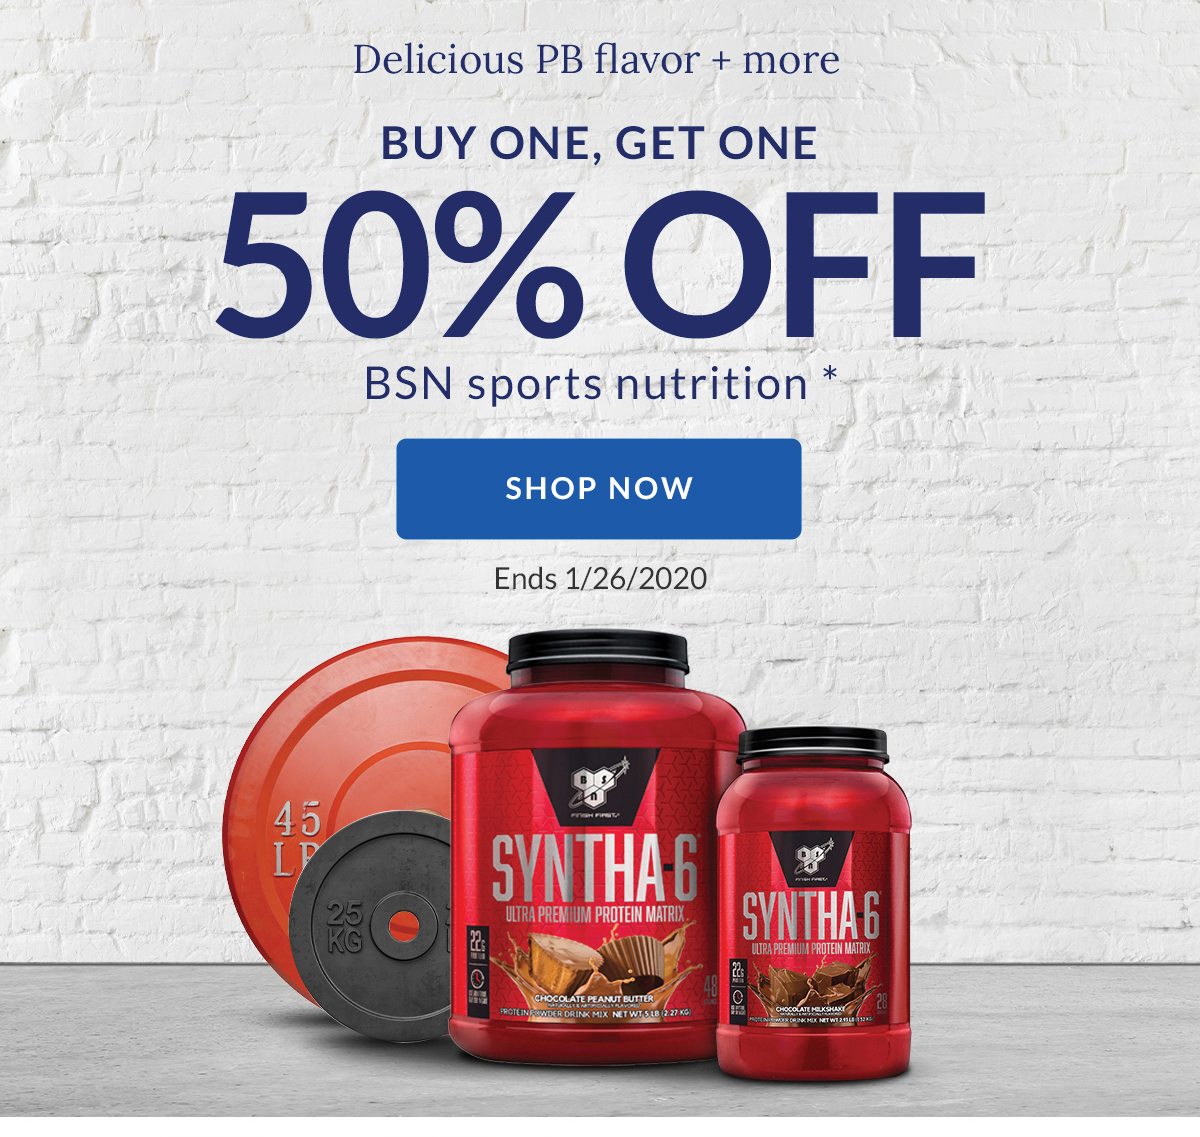 Delicious PB flavor + more | BUY ONE, GET ONE 50% OFF BSN sports nutrition * | SHOP NOW | Ends 1/26/2020